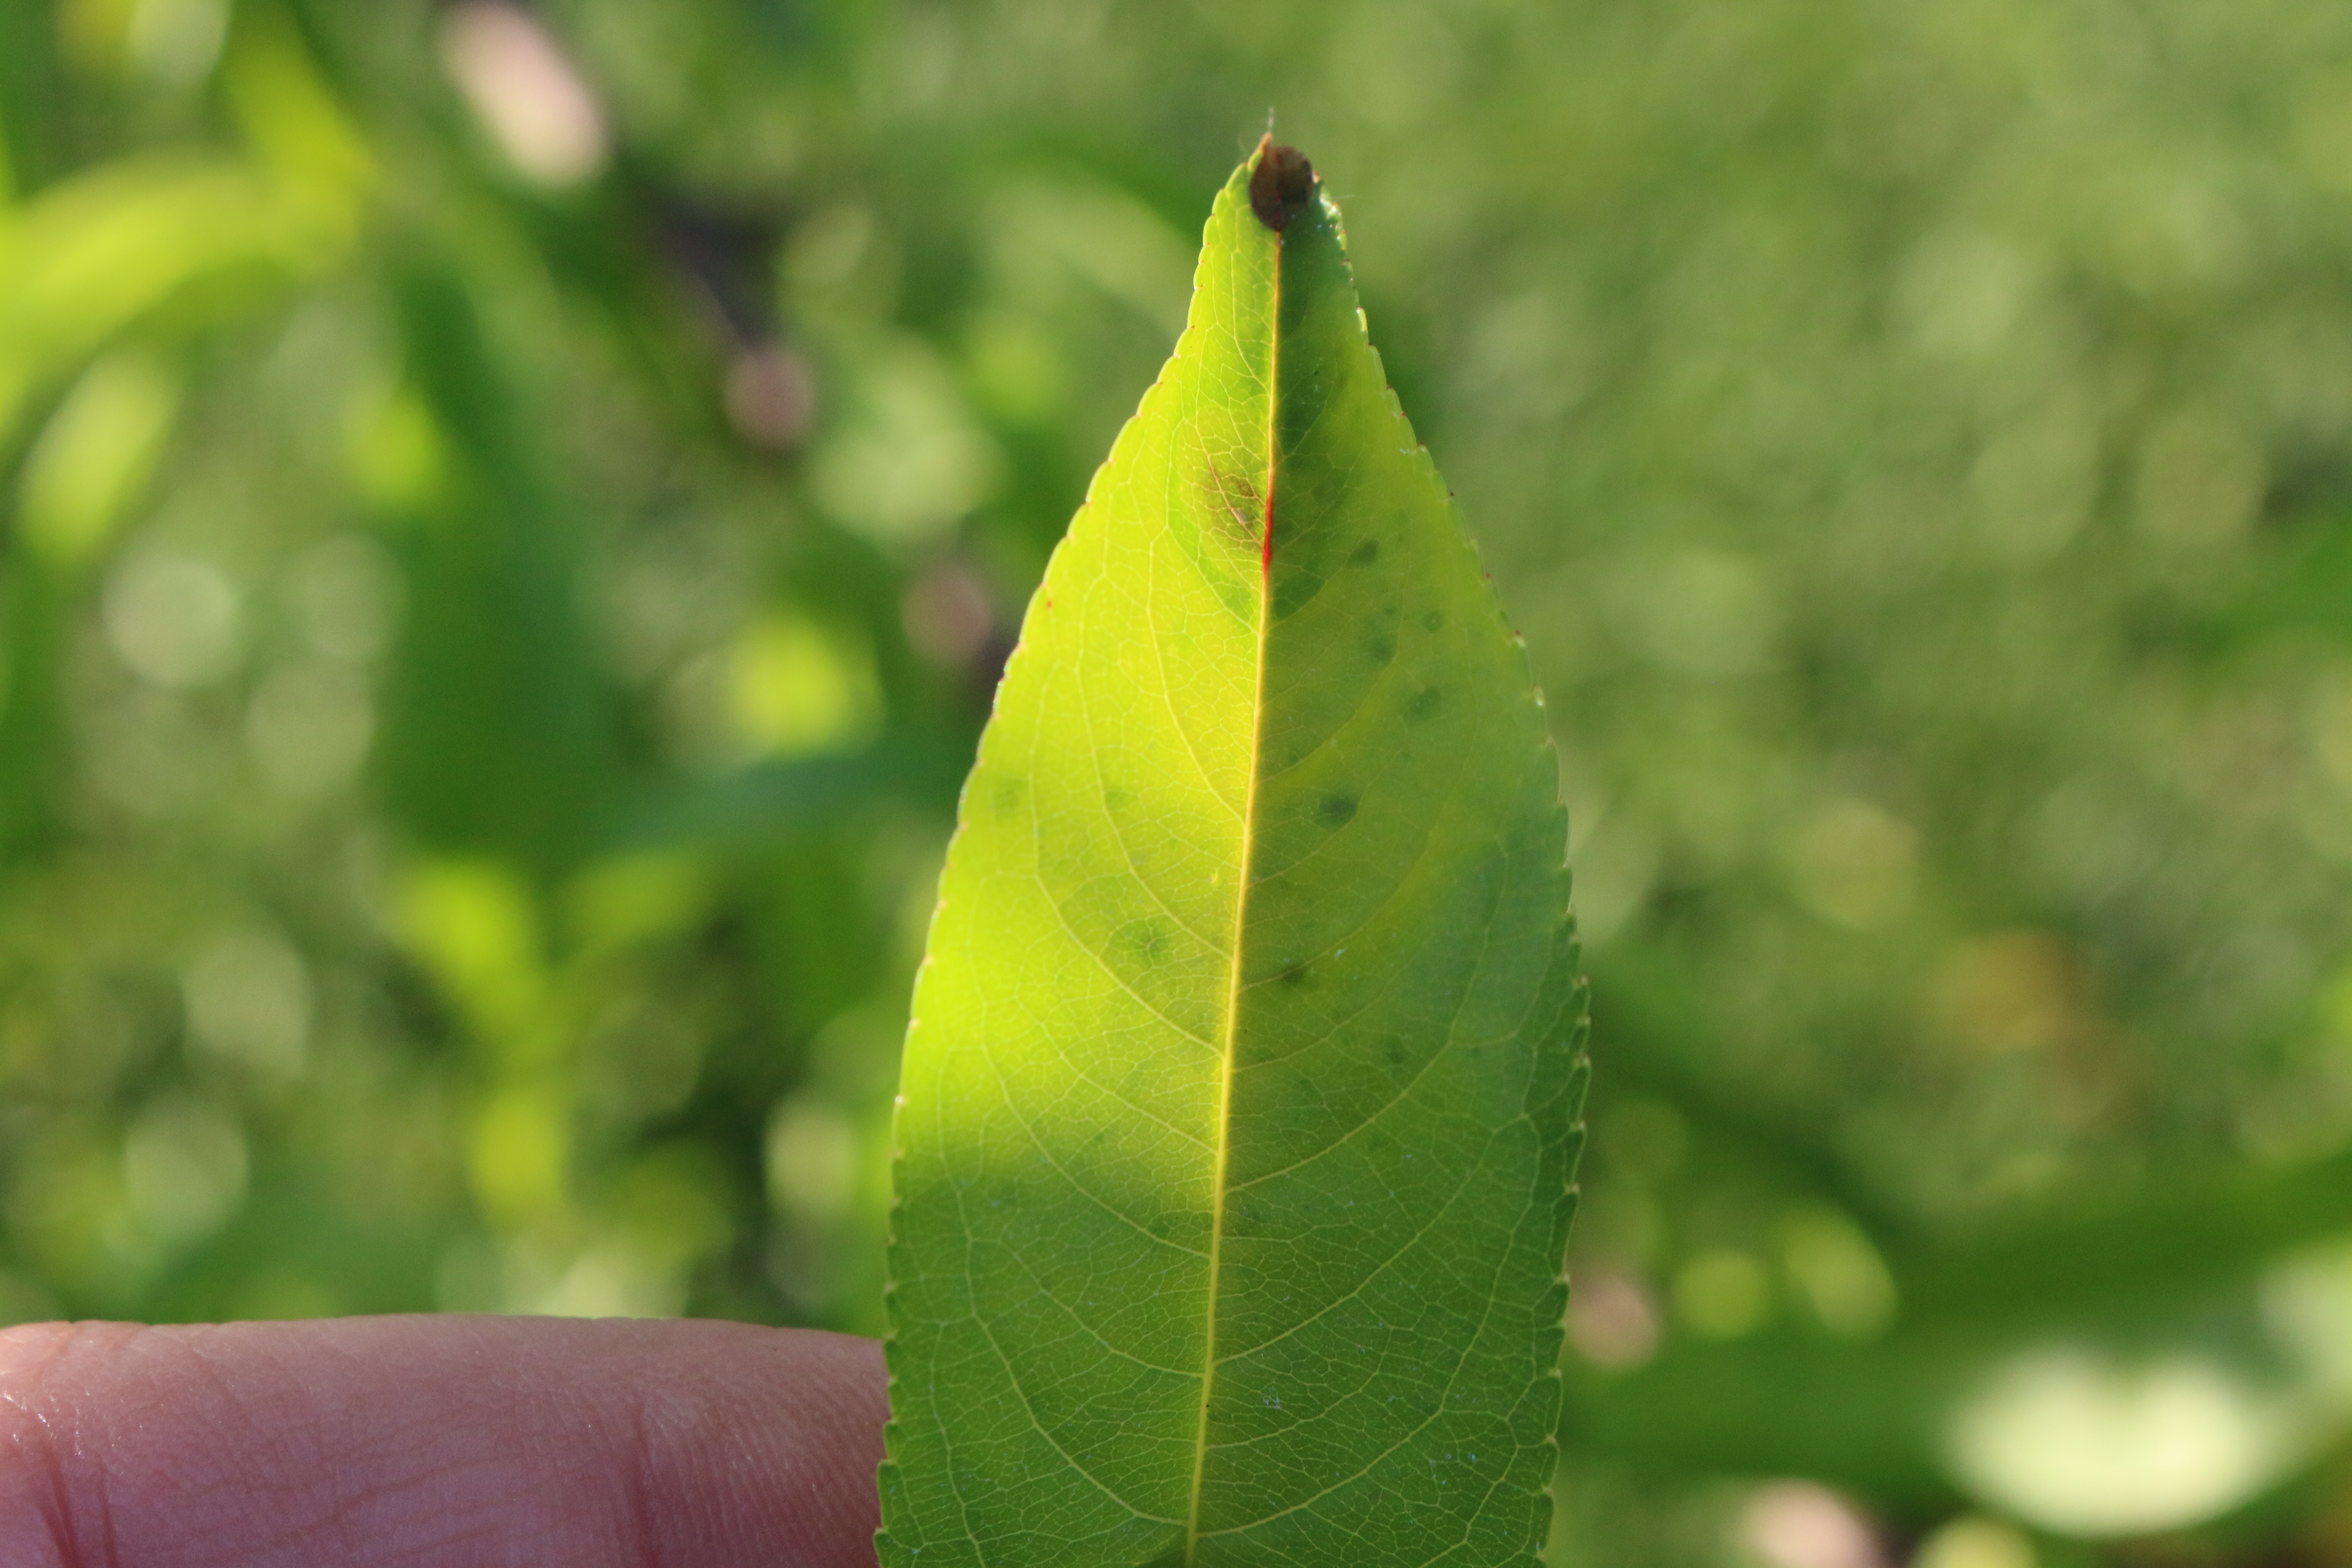 Peach tree leaf fall in May - Ask an Expert